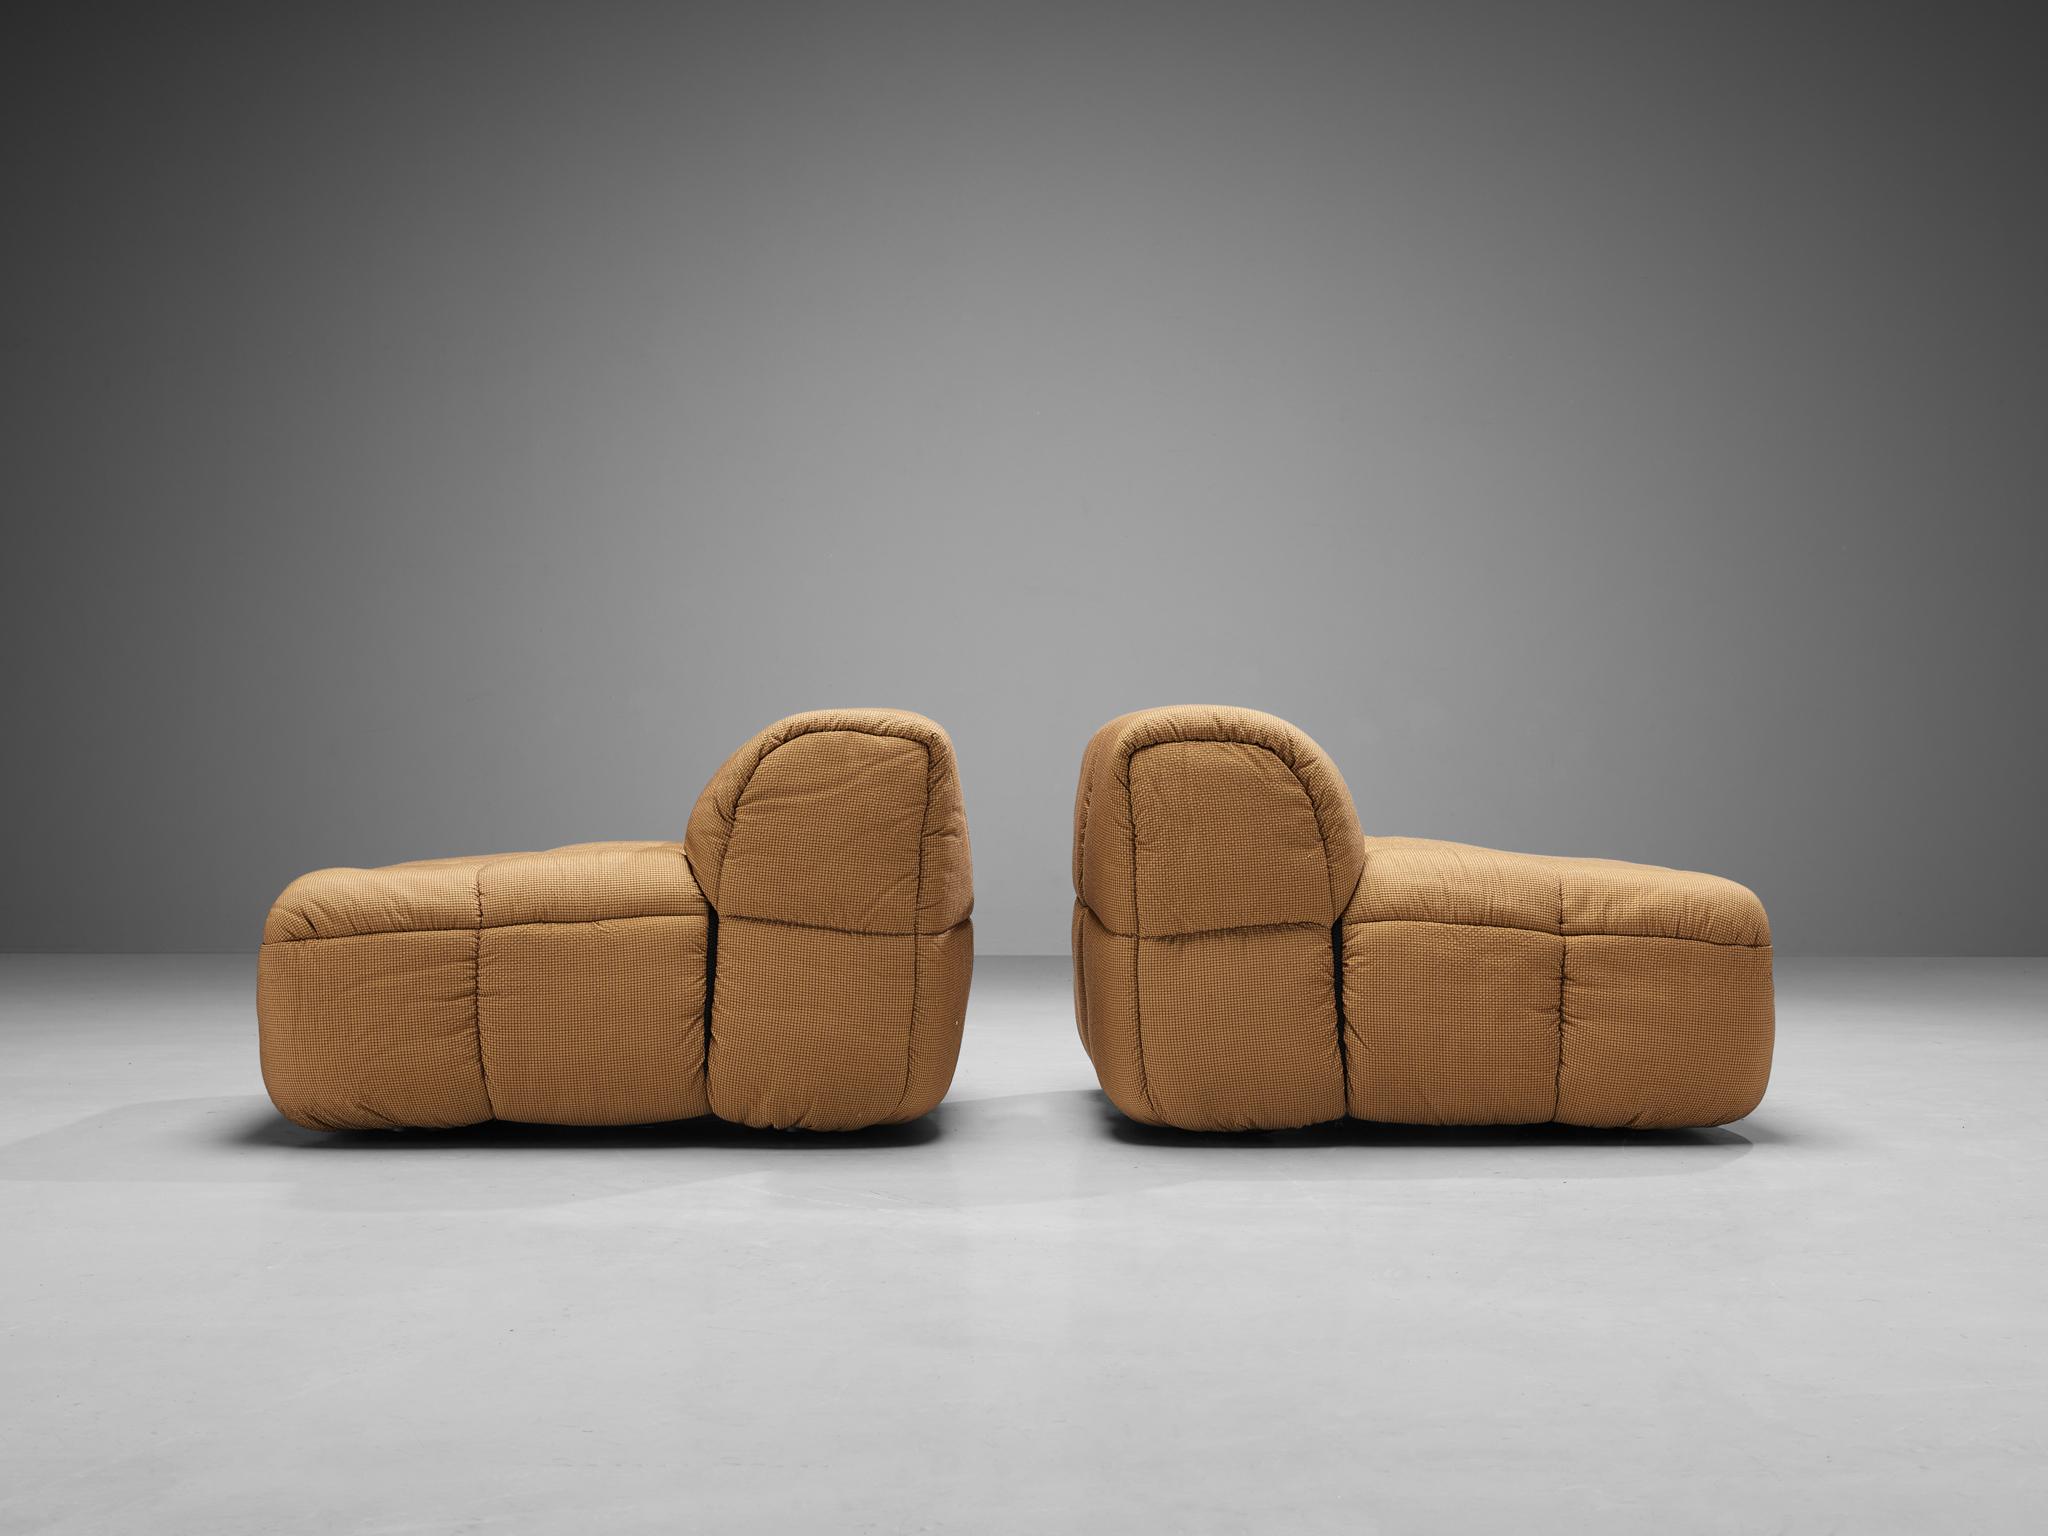 Cini Boeri for Arflex Modular 'Strips' Pair of Two-Seater Elements  For Sale 1